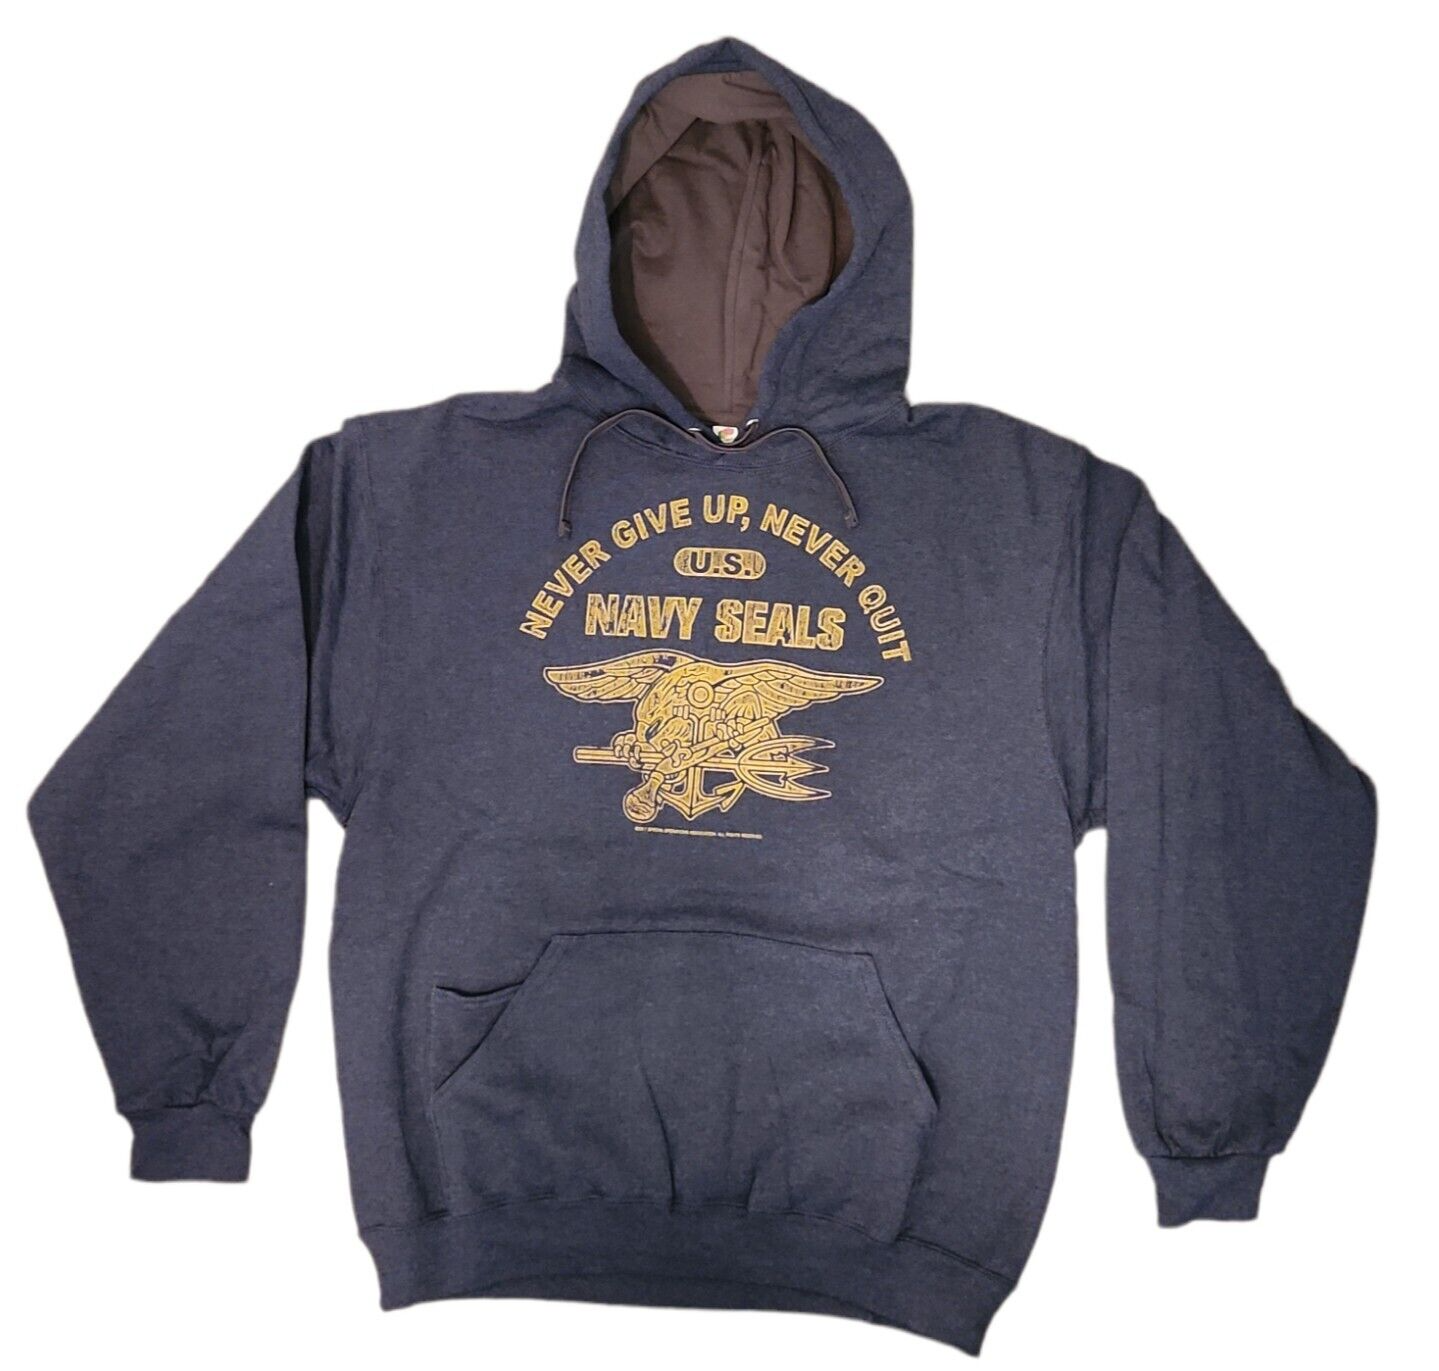 Sweat Shirt- NAVY SEALS "Never Give Up Never Quit" Heather Blue